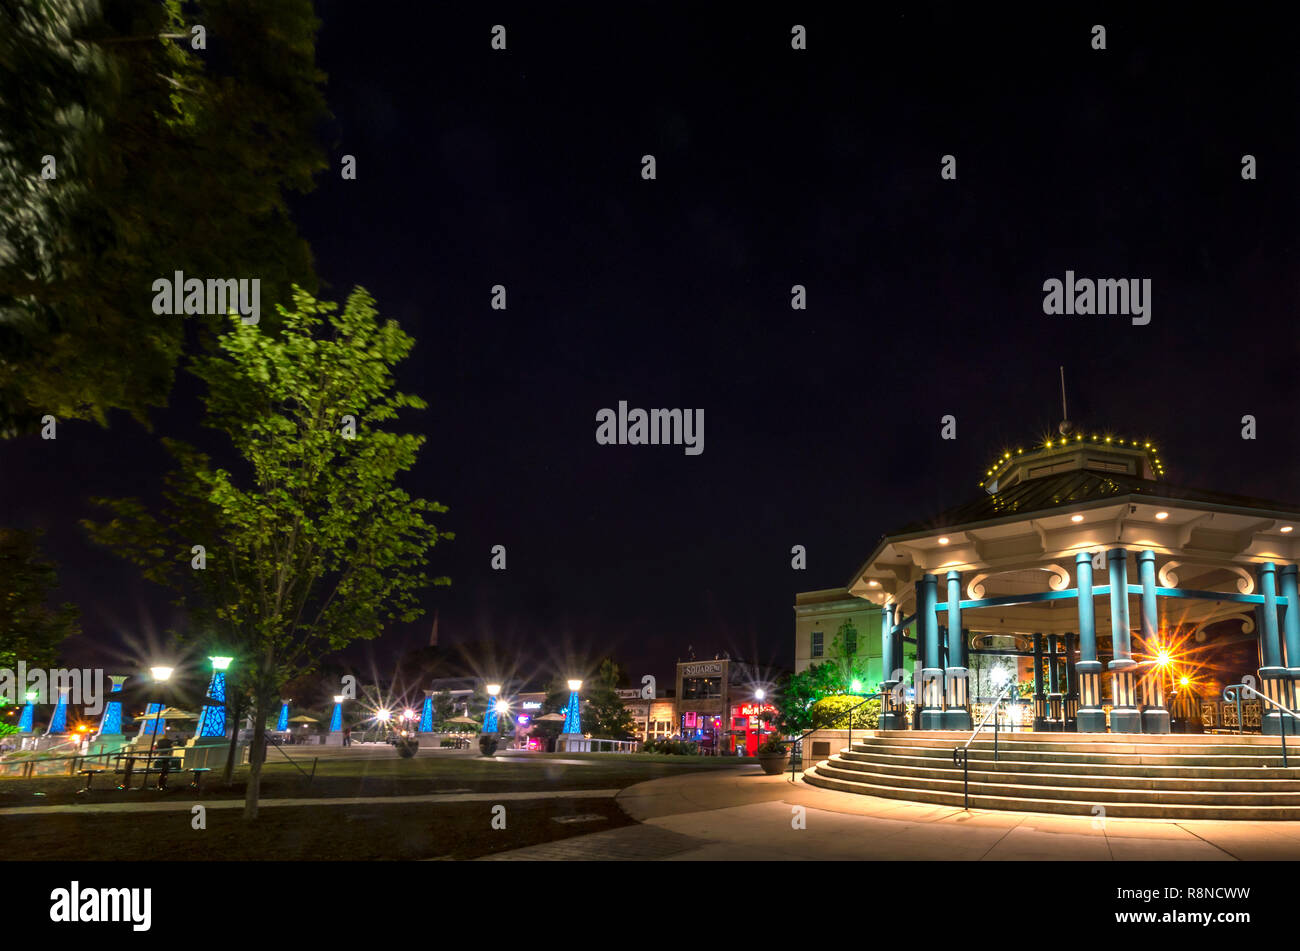 The Decatur Square gazebo and bandstand is pictured at night, June 4, 2014, in Decatur, Georgia. Stock Photo